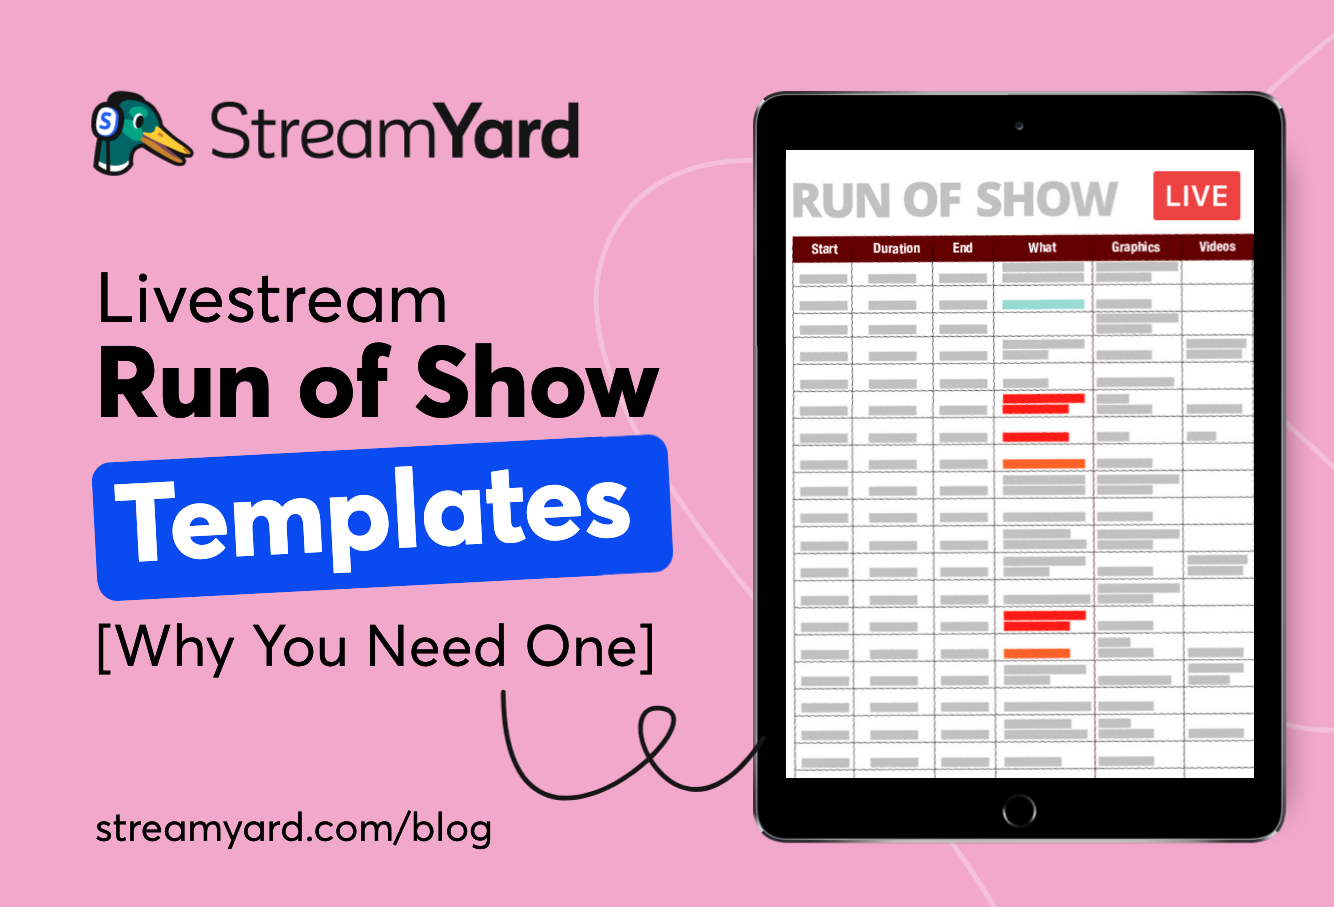 Run of Show 101 How to Make Your Live Stream Run Smoothly